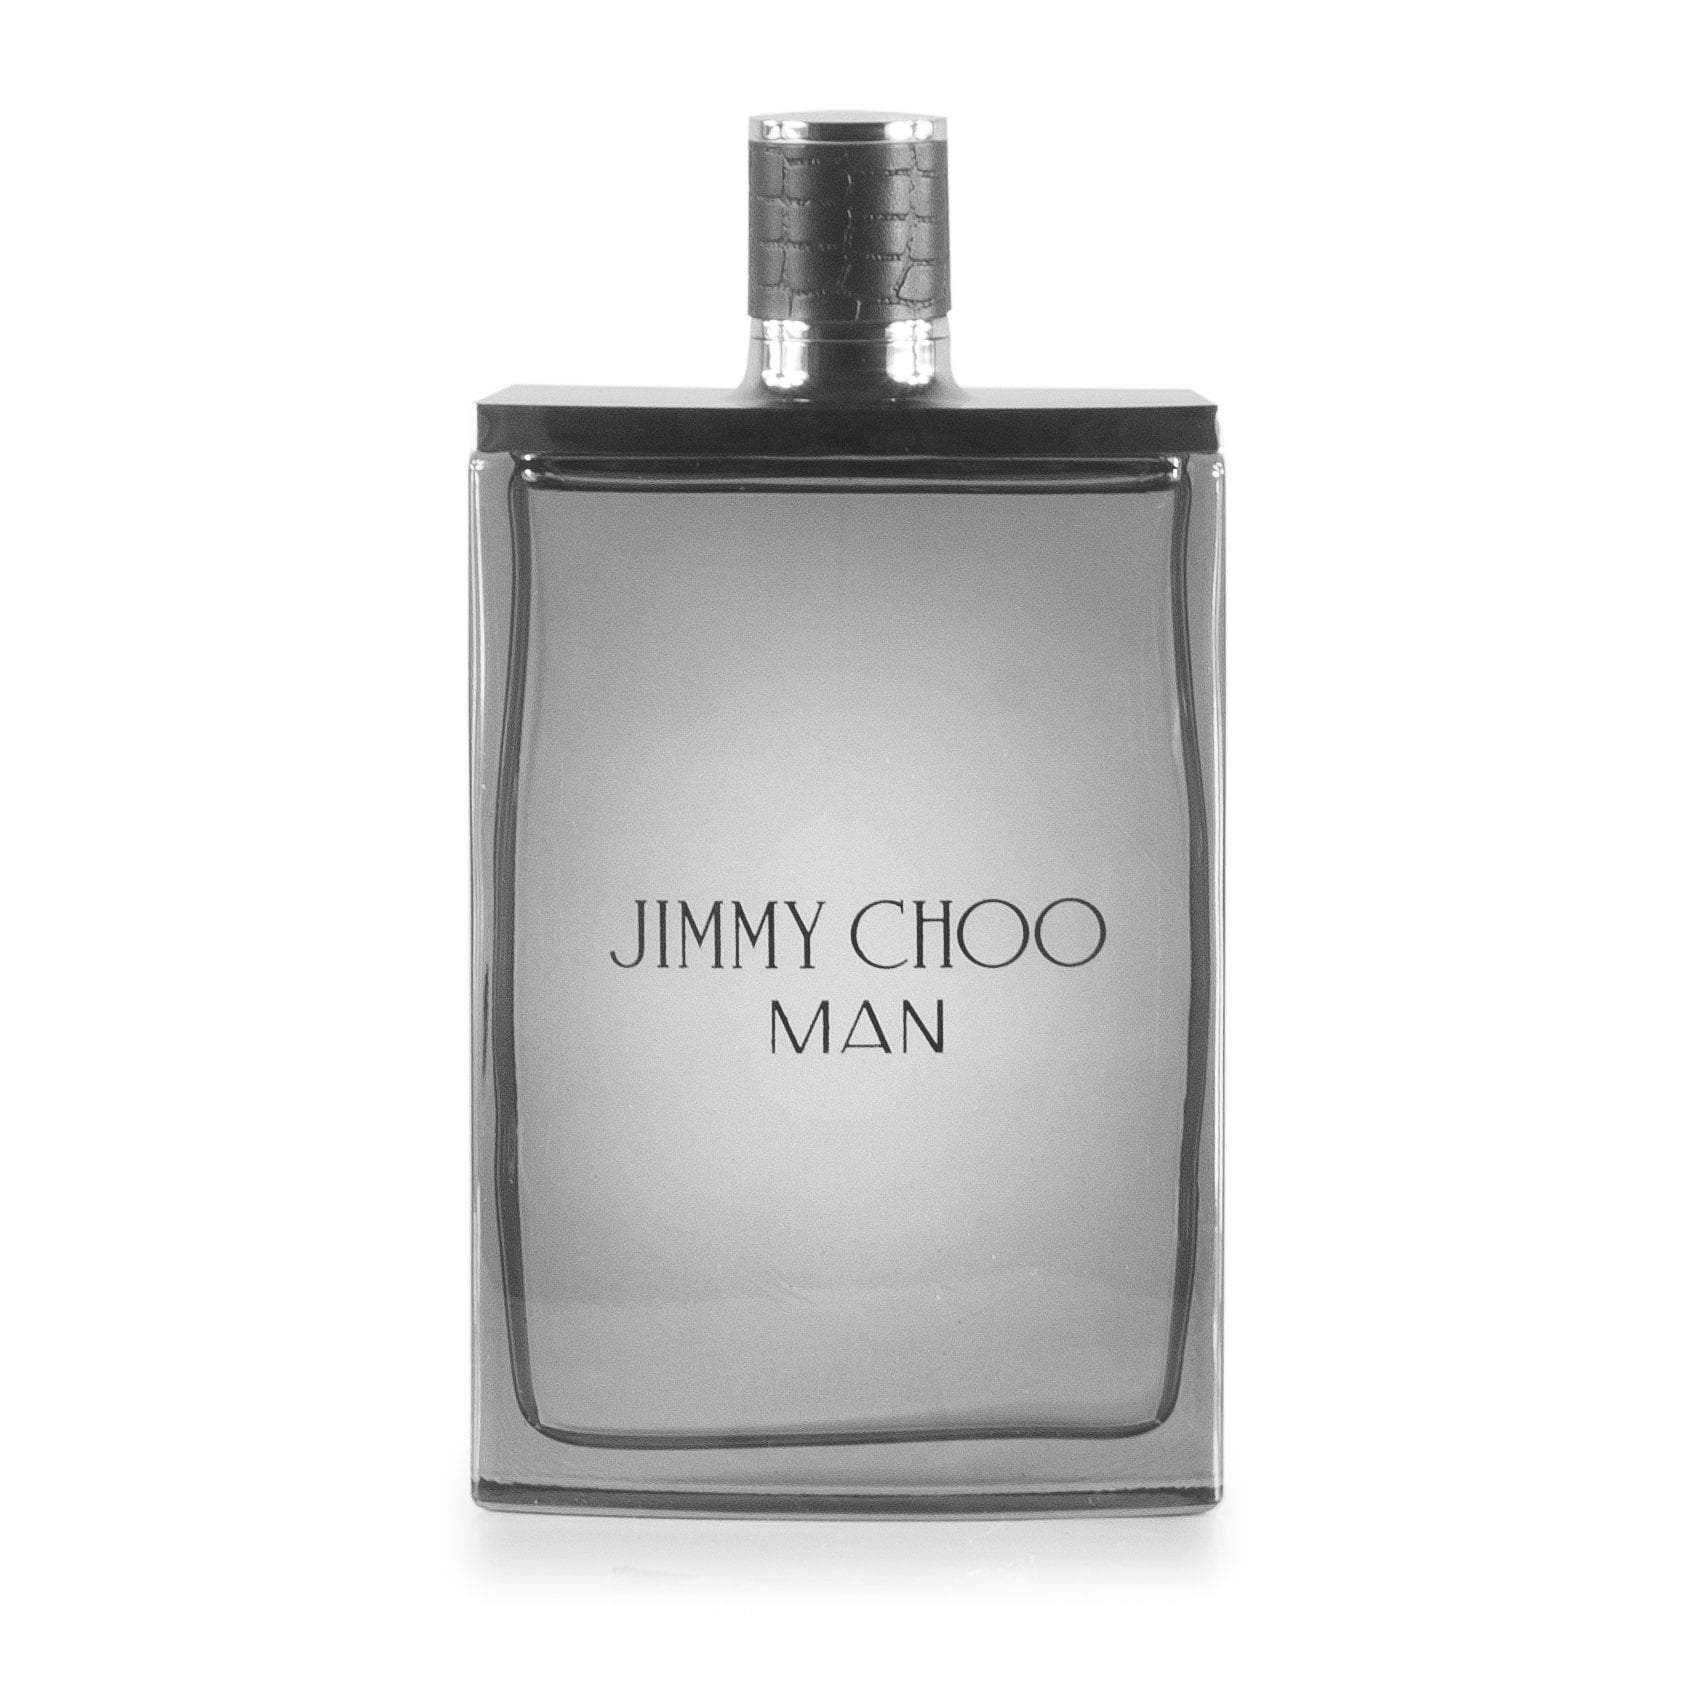 Jimmy Choo Man EDT Spray for Men by Jimmy Choo – Fragrance Outlet